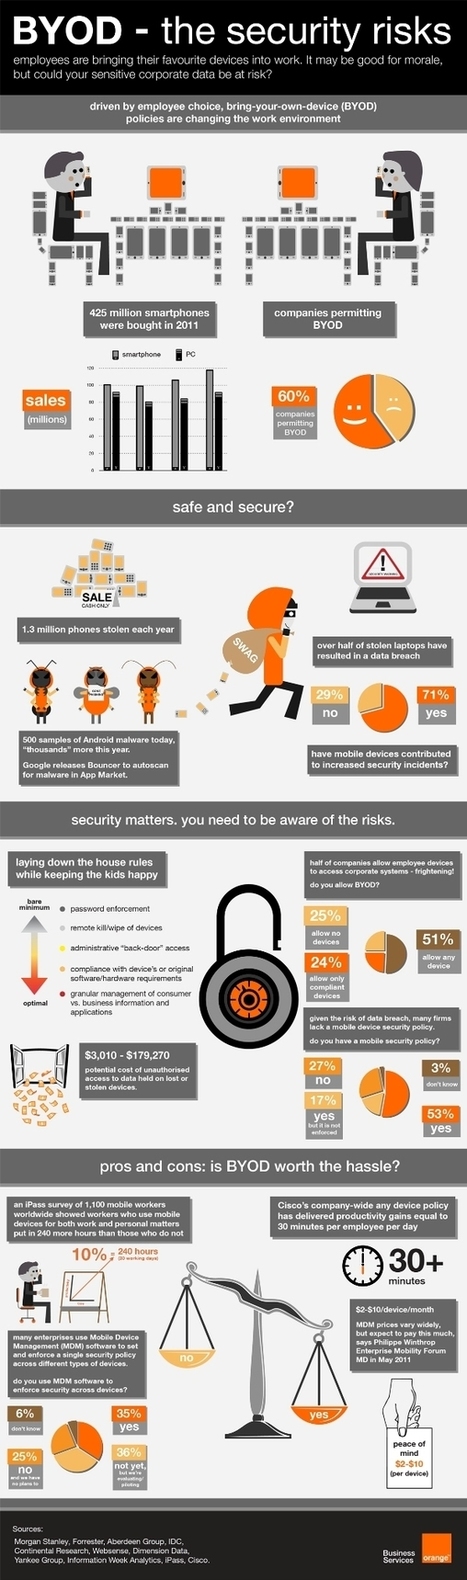 BYOD Security Issues [Infographic] | digital marketing strategy | Scoop.it